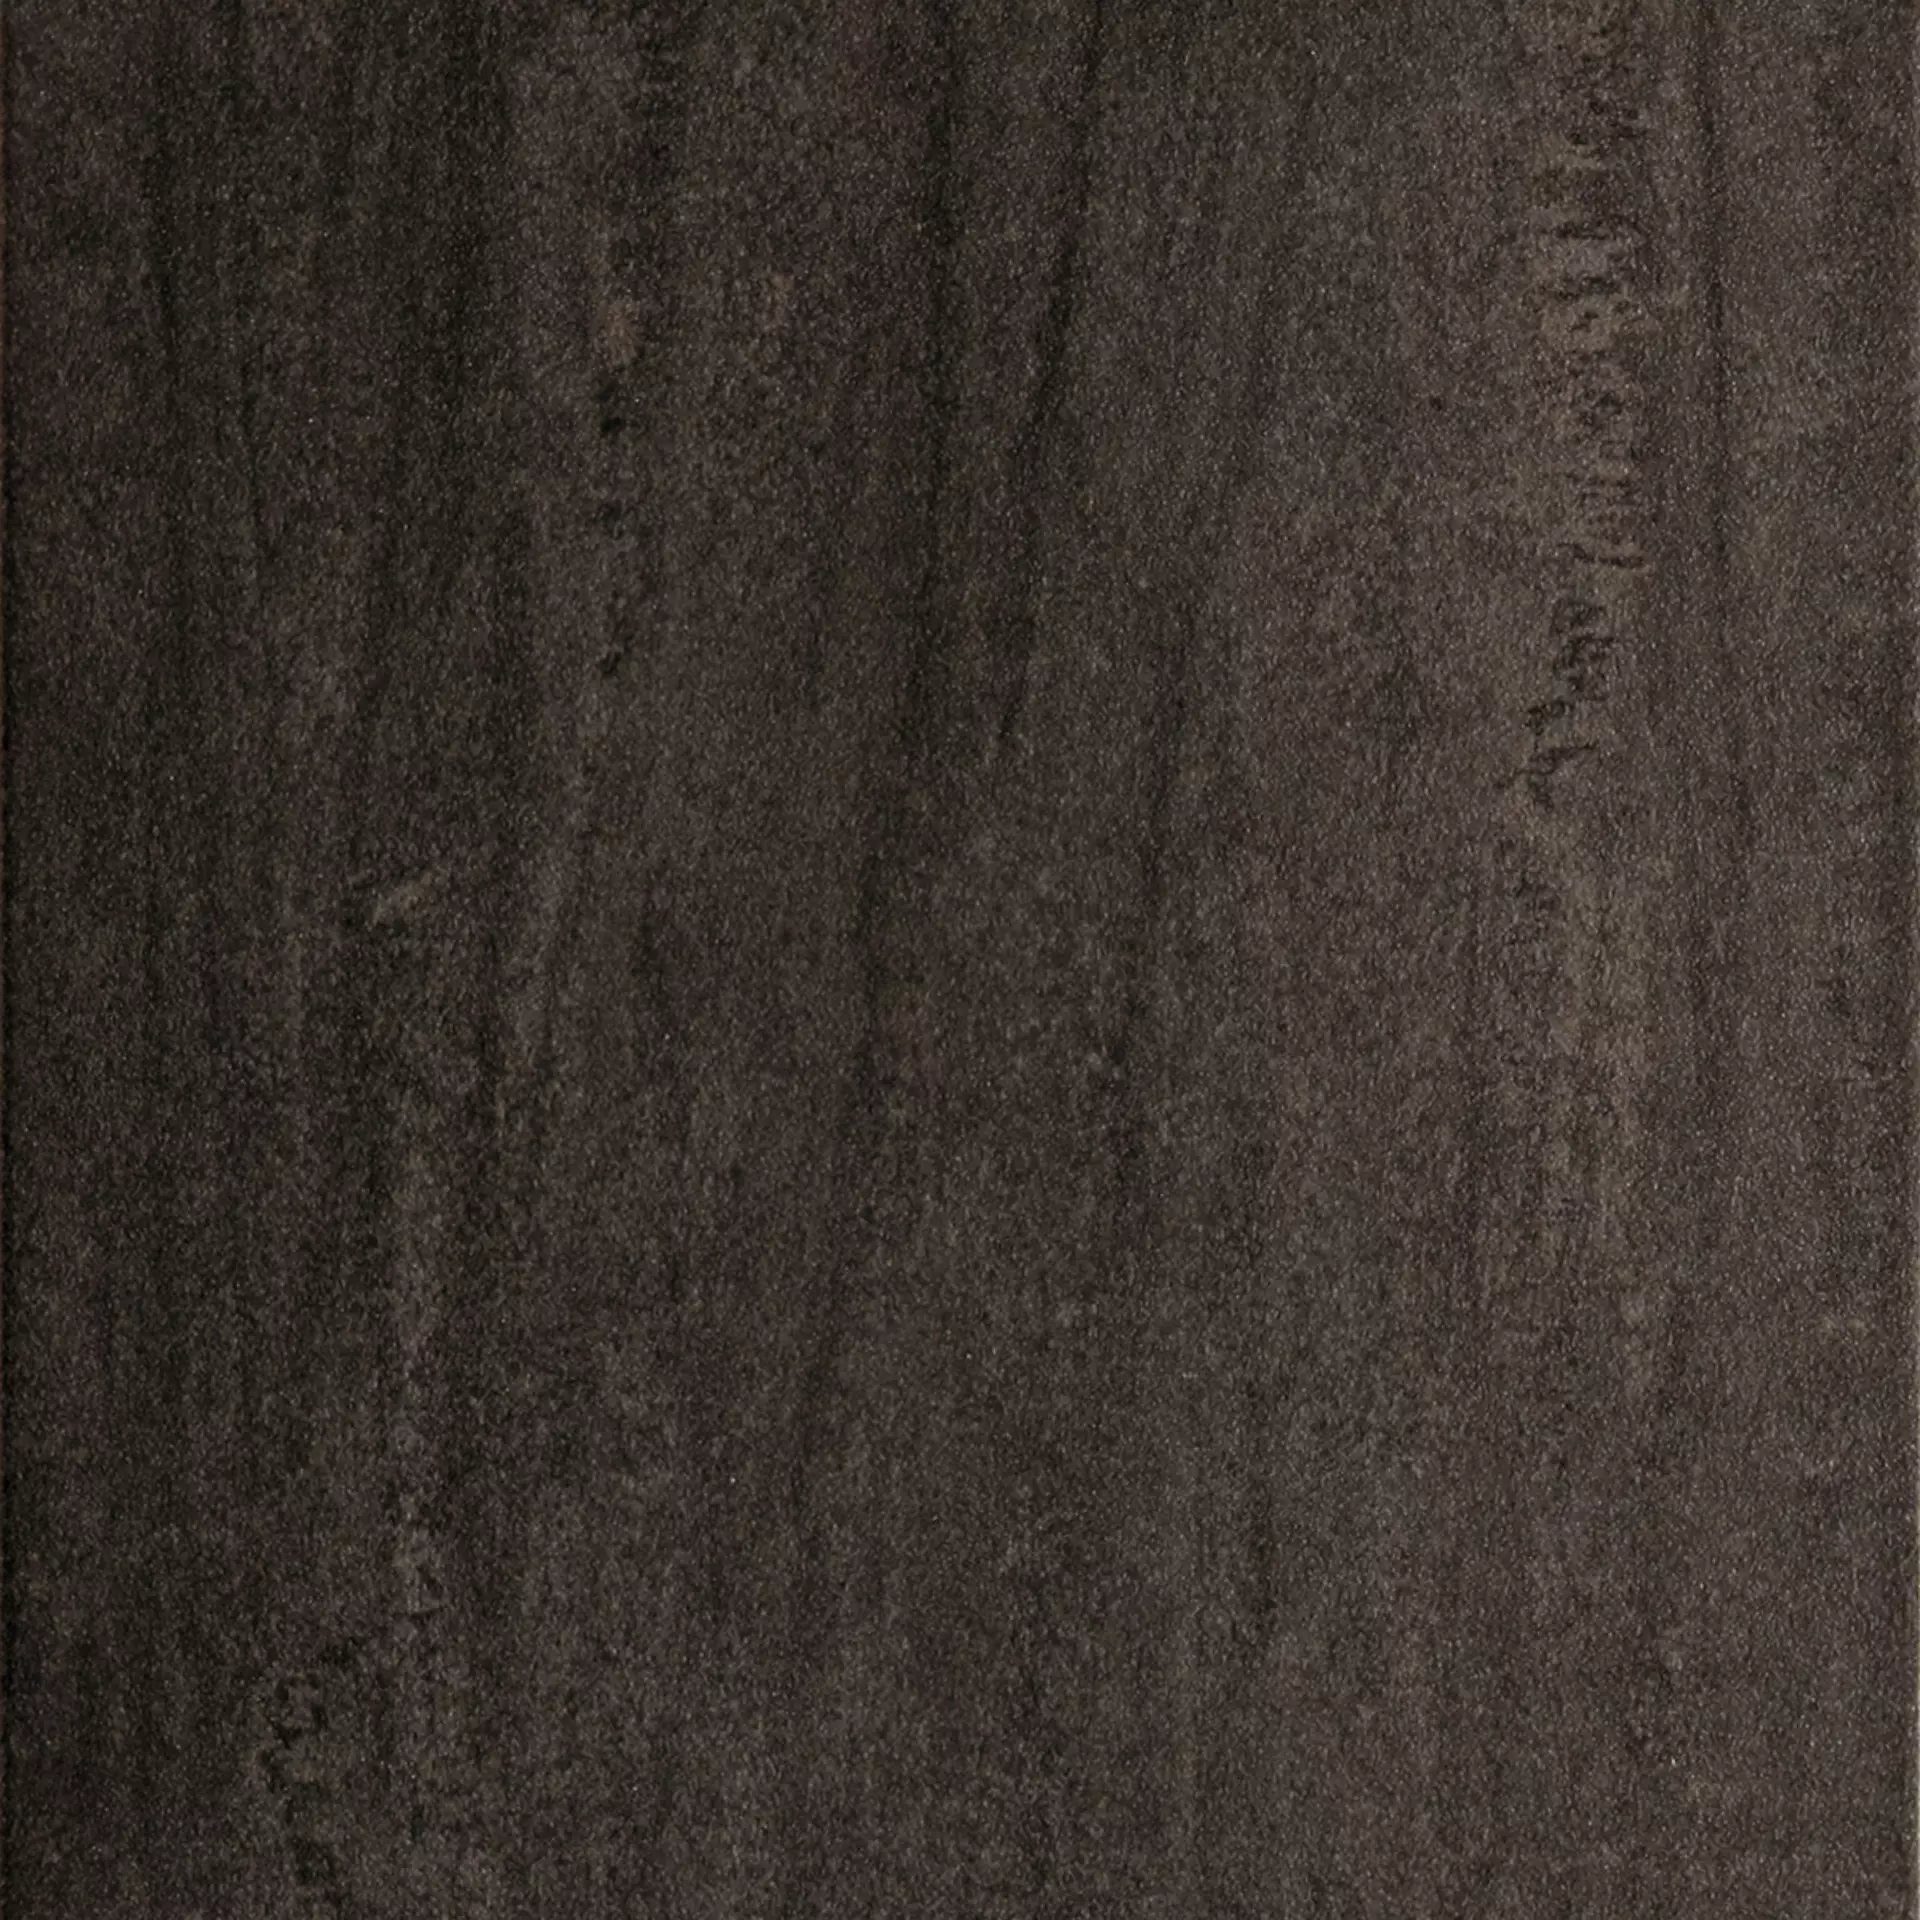 Rondine Contract Anthracite Naturale J84028 60,5x60,5cm 8,5mm